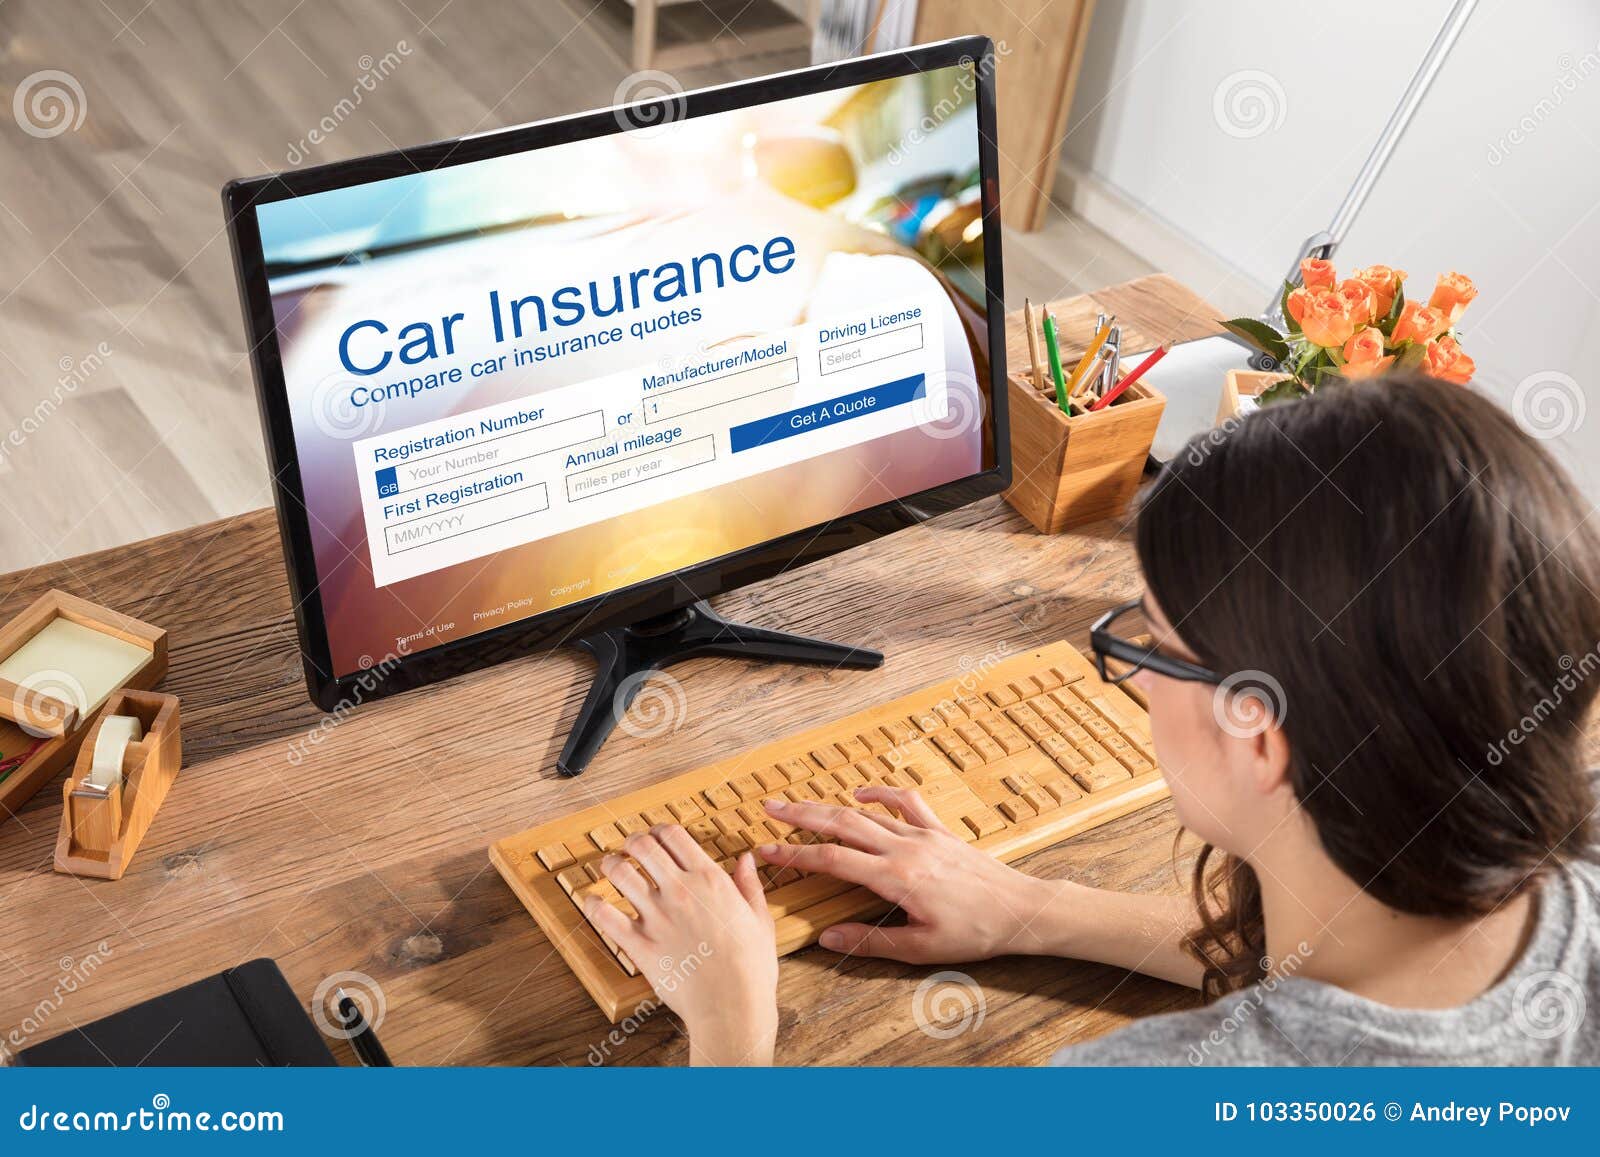 woman filling the car insurance form on computer